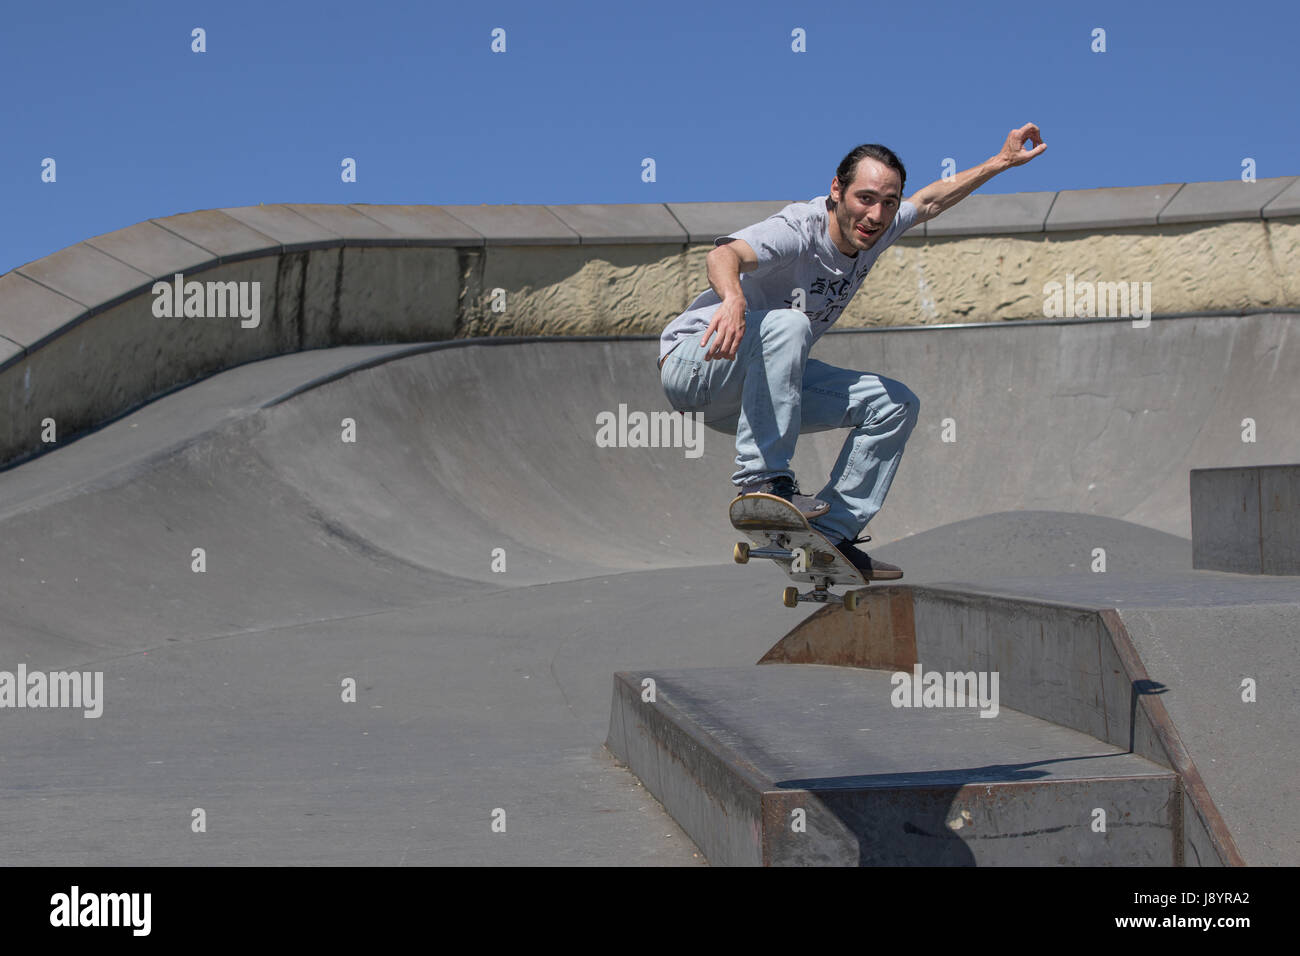 Handsome skateboarder jumping towards the camera in the air Stock Photo